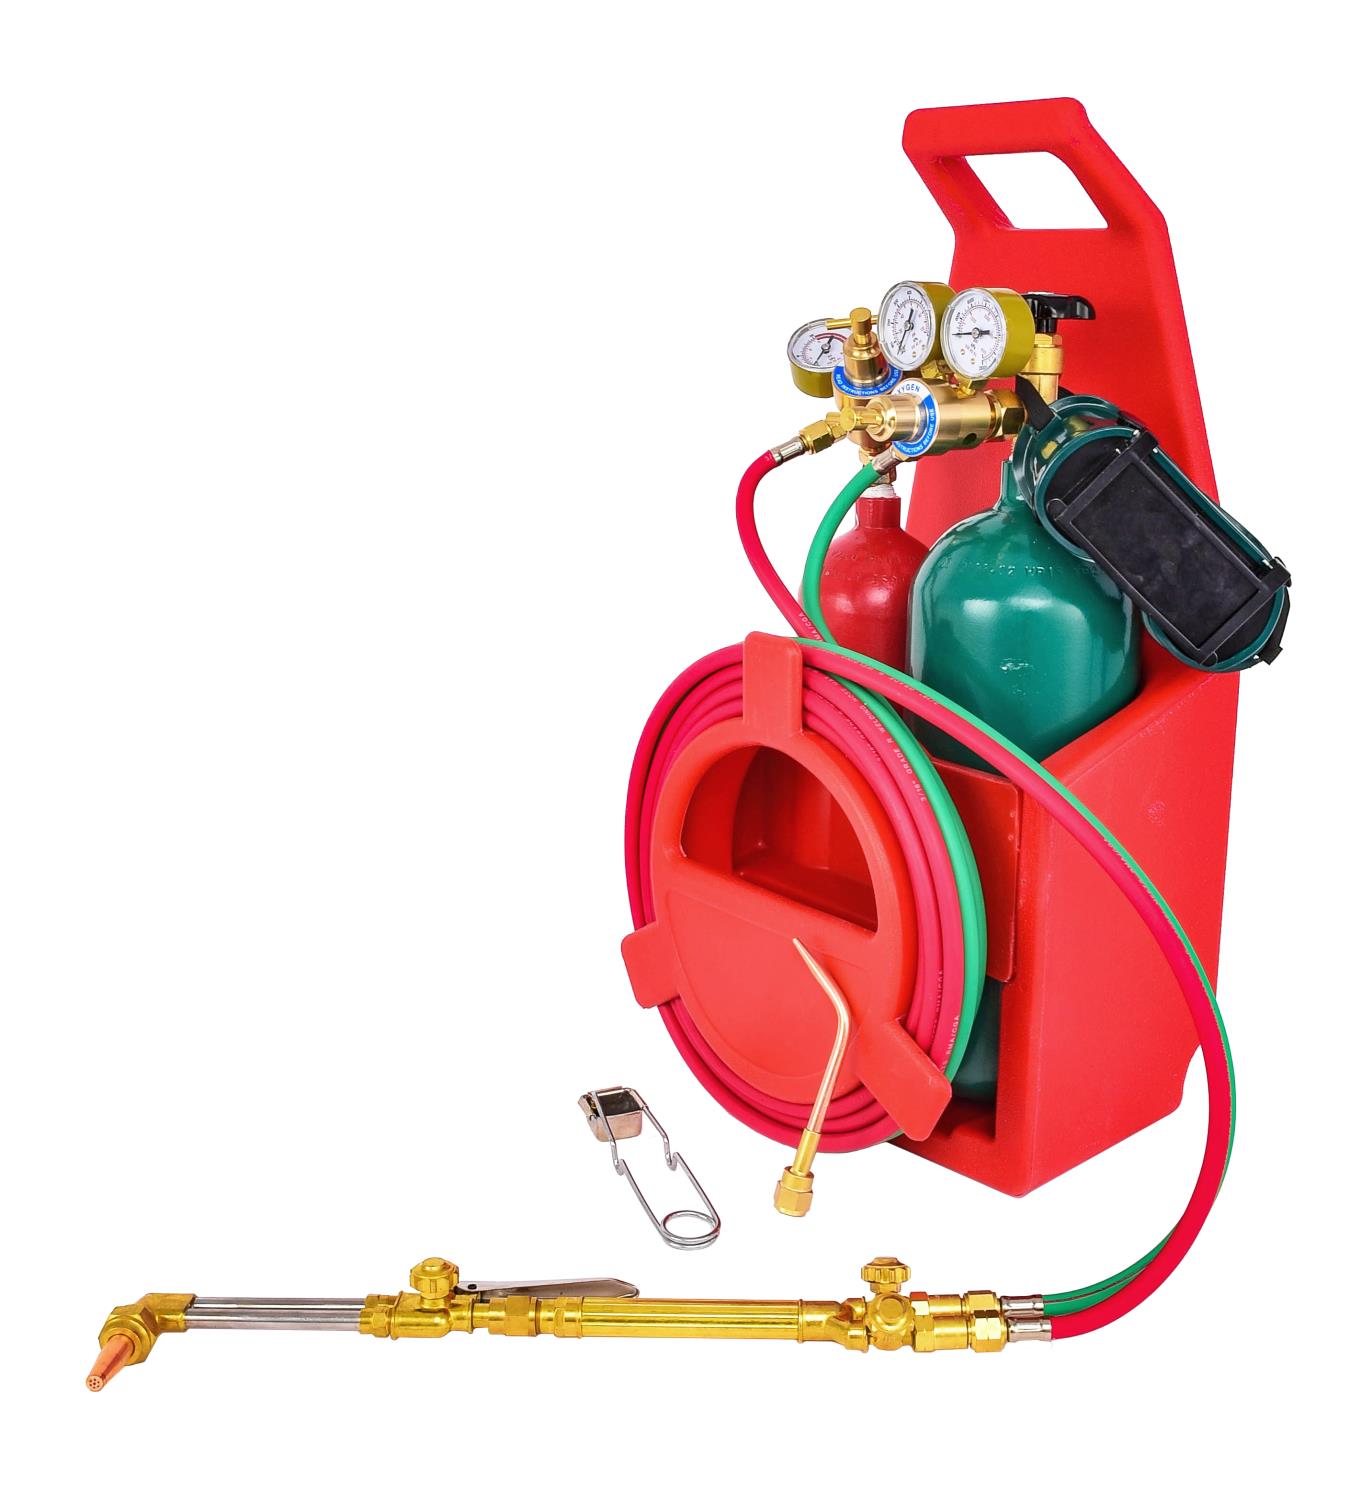 Oxy Acetylene Welding & Cutting Torch Kit [With Tanks]